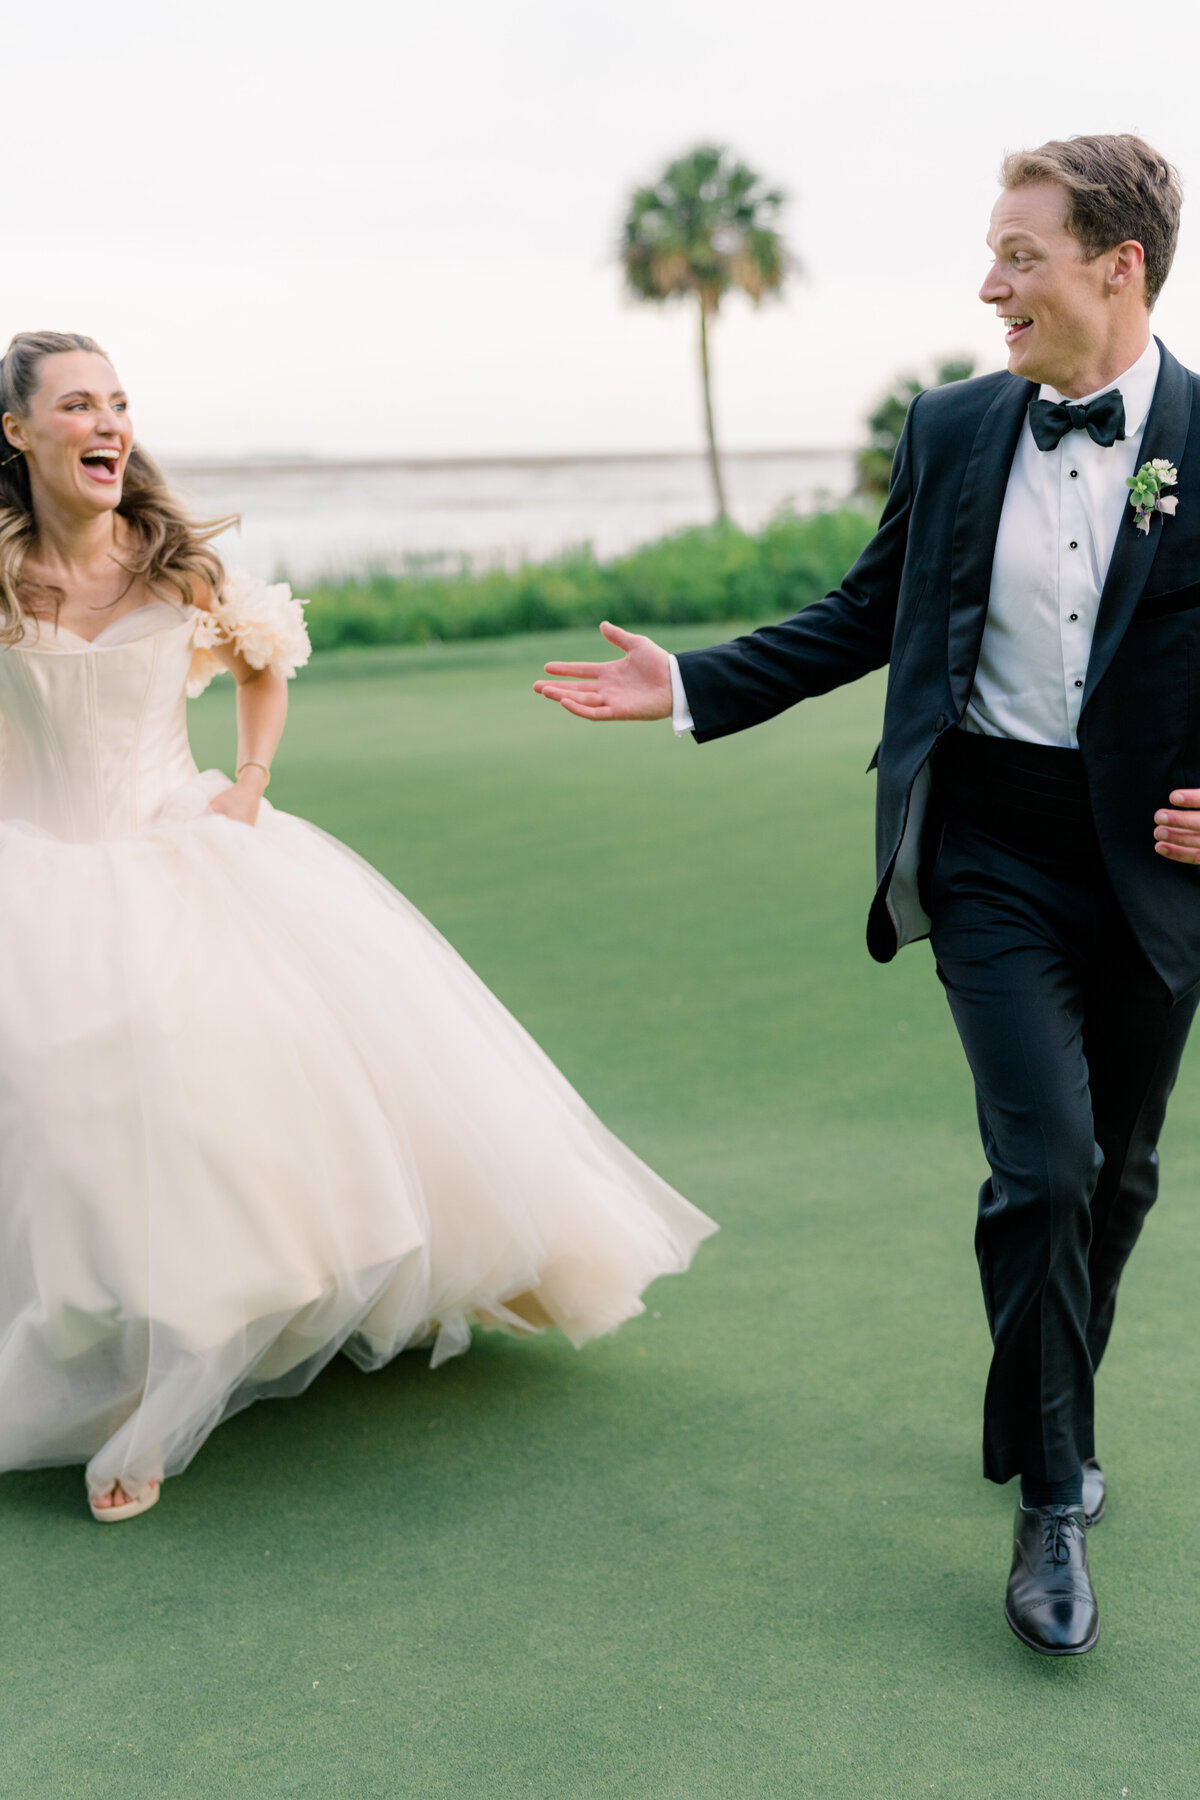 Bride and groom running together with palm tree in the background. Blush wedding dress with floral sleeves, corset top, and long tulle bottom. Spring Island Destination Wedding. Old Tabby Links. Southeast Destination wedding photographer